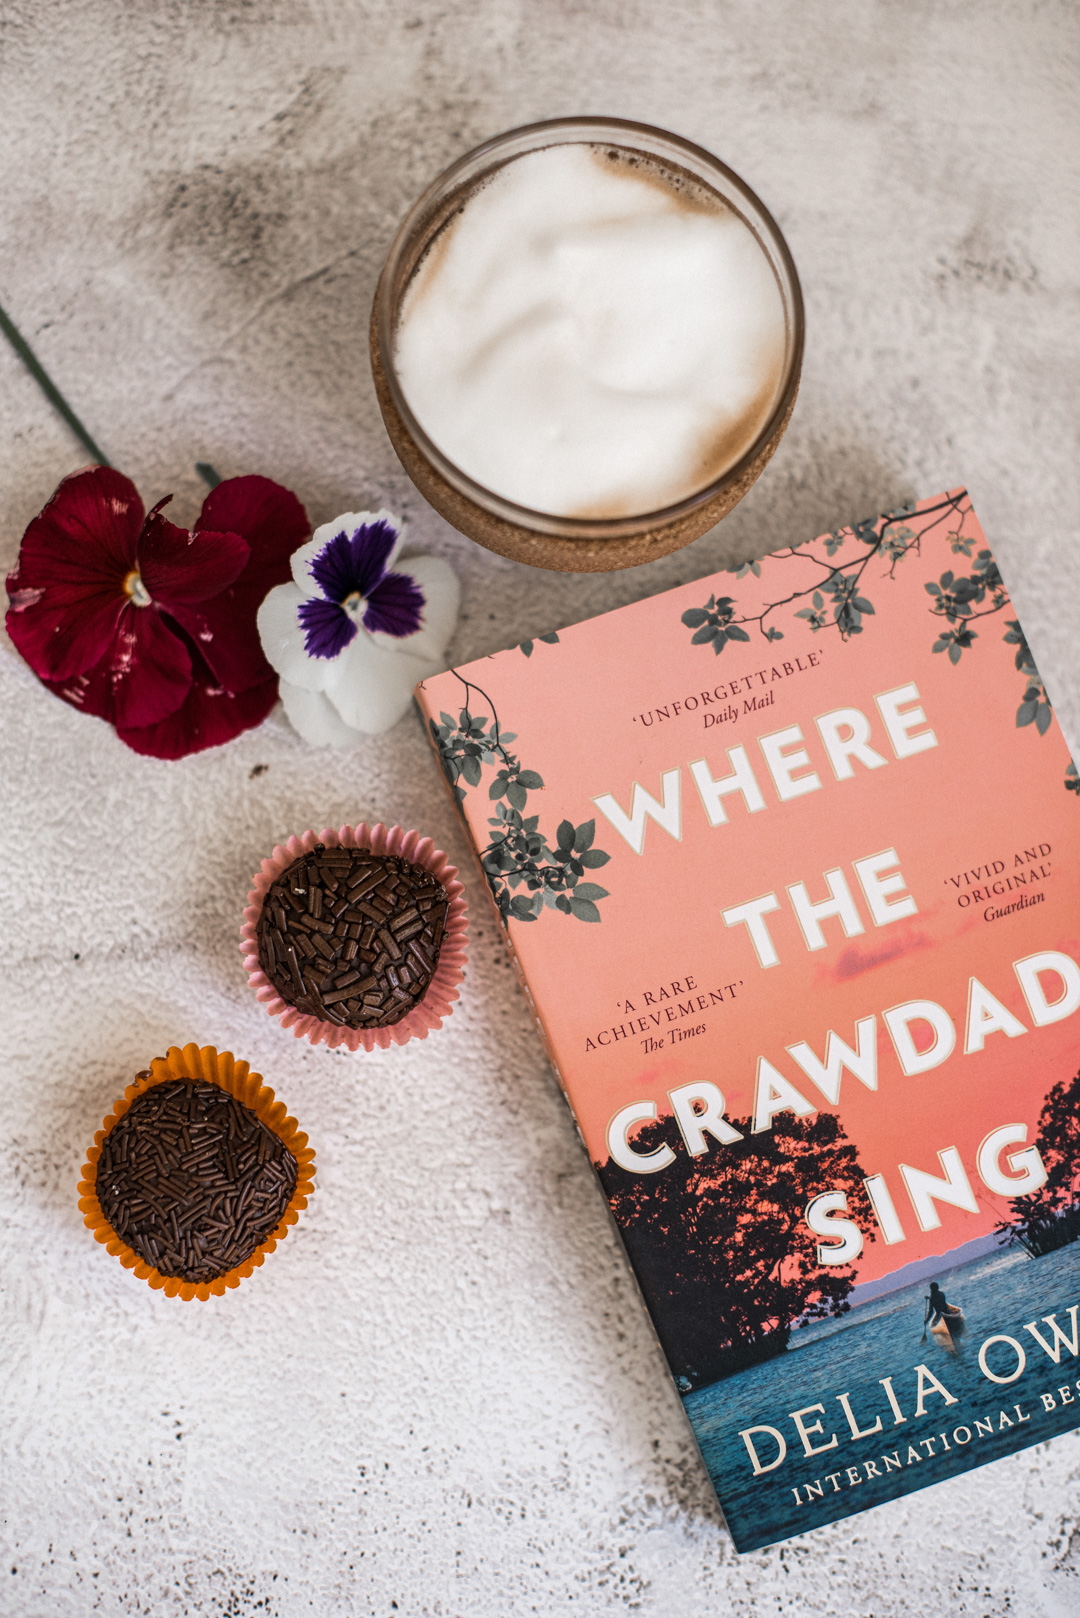 My top 10 reads of 2020 - Where The Crawdads Sing